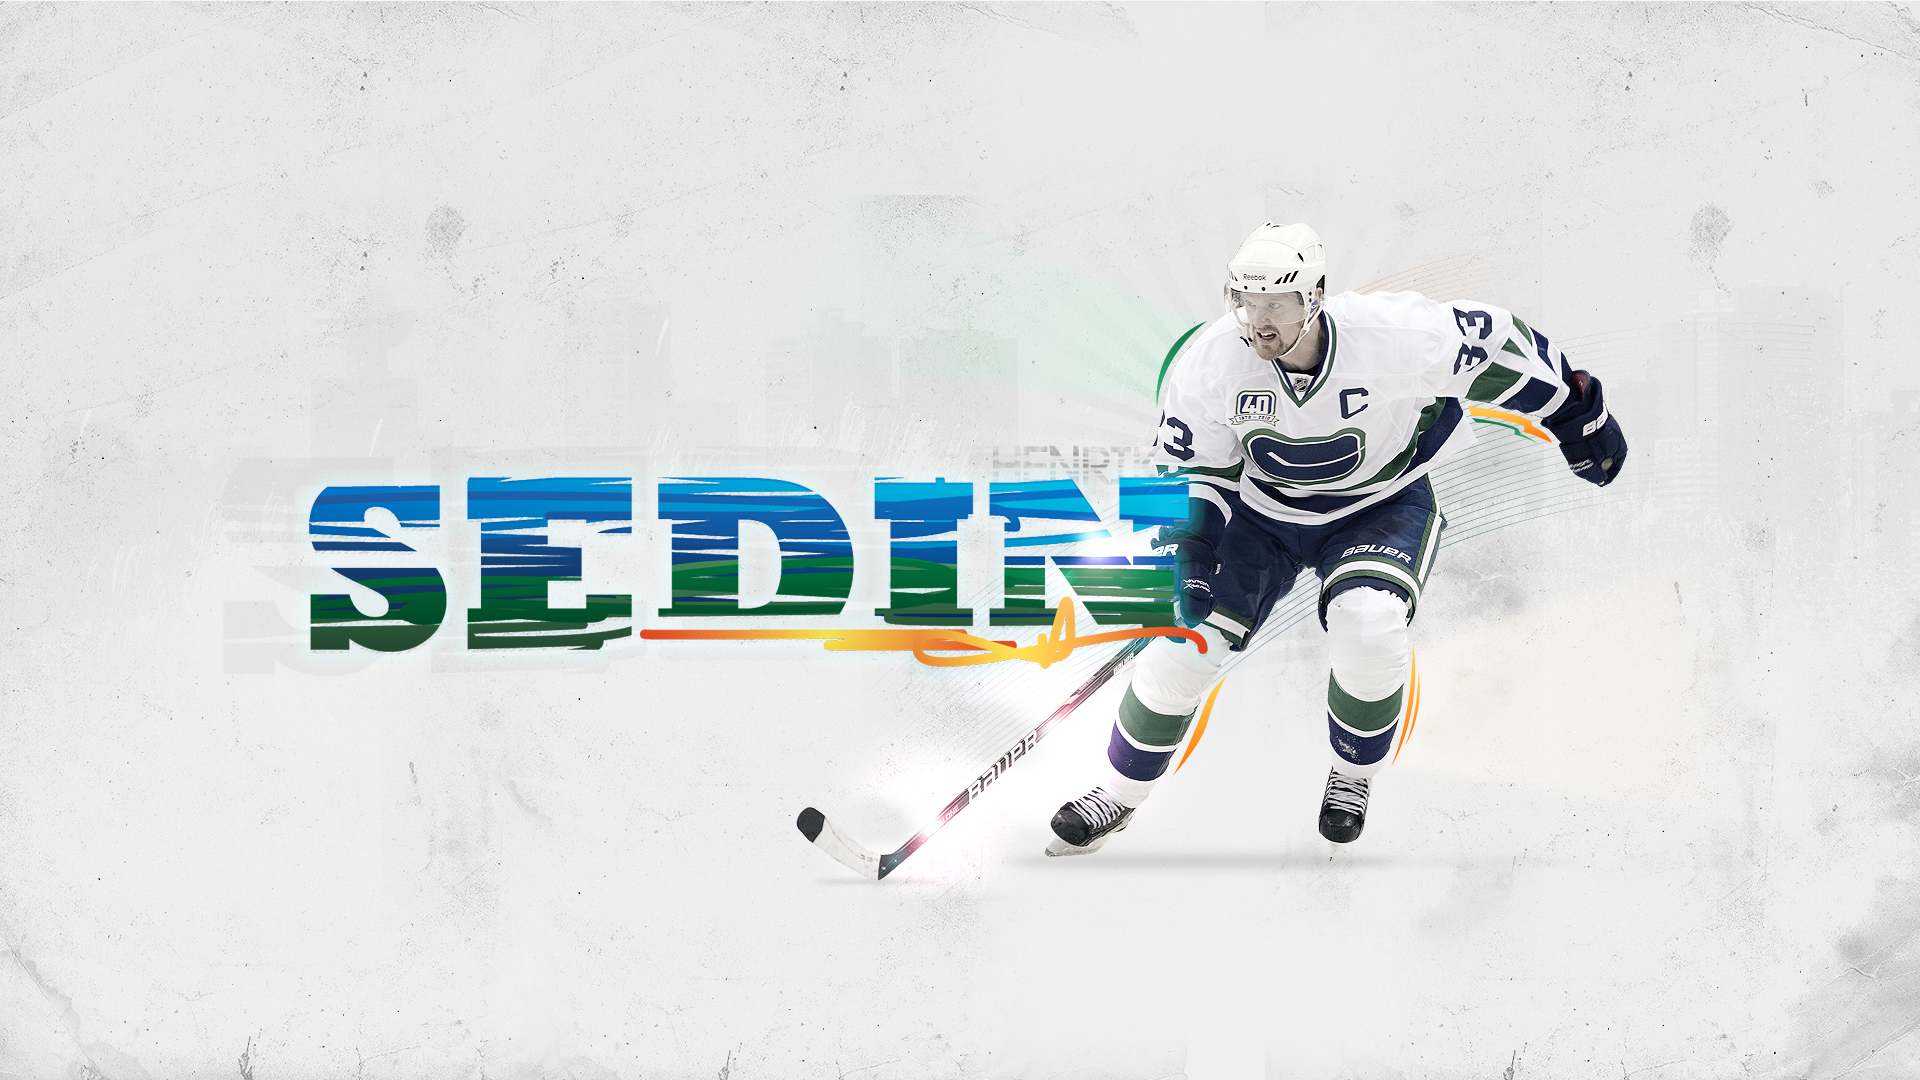 Henrik Sedin on ice wallpaper and image, picture, photo